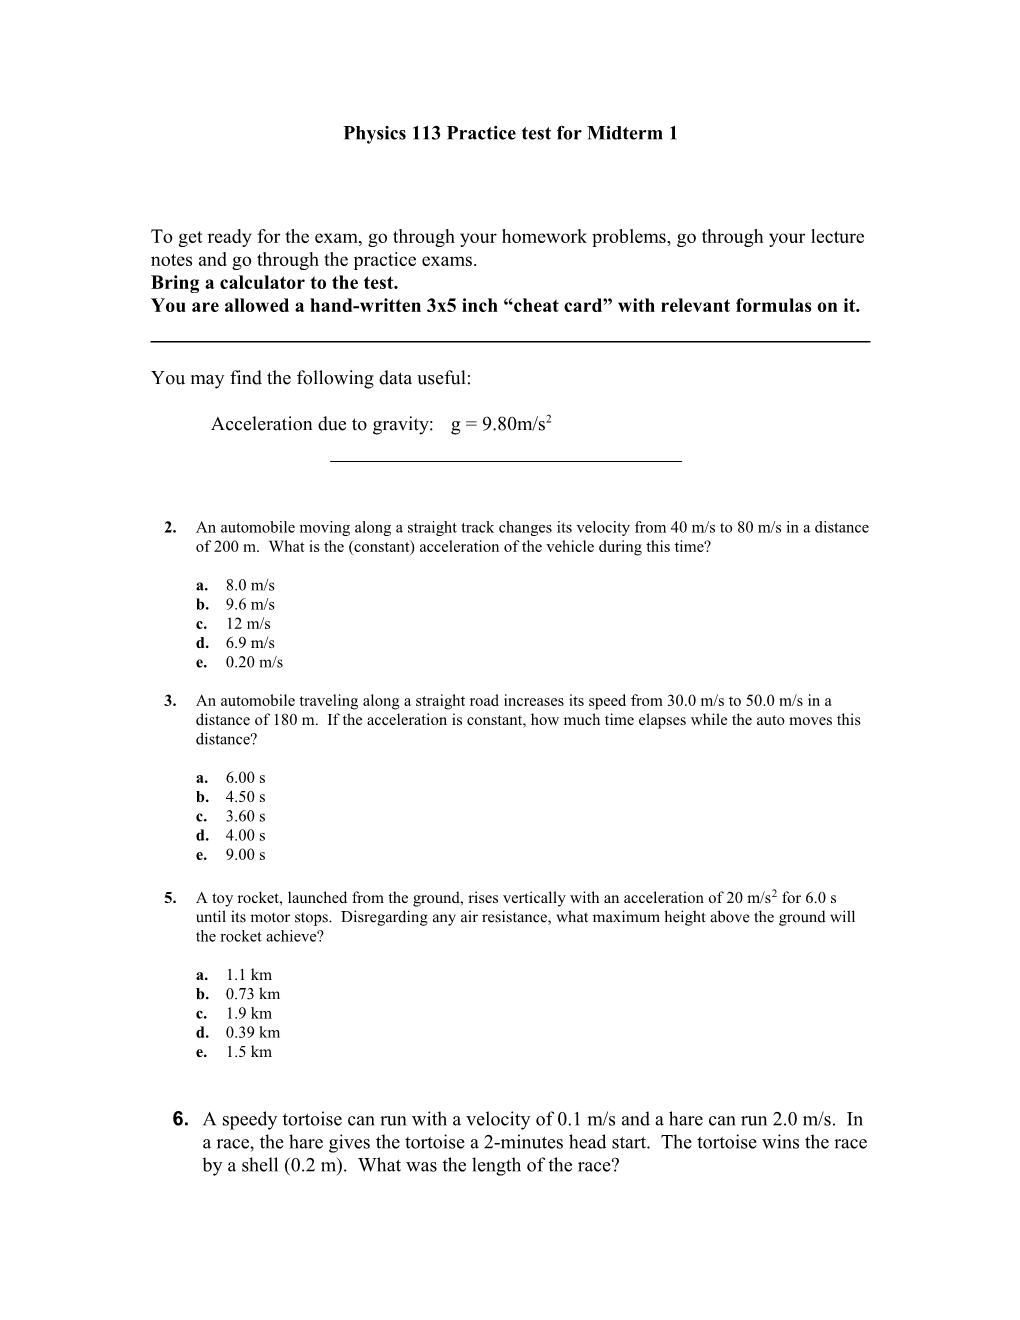 Physics 113 Practice Test for Midterm 1